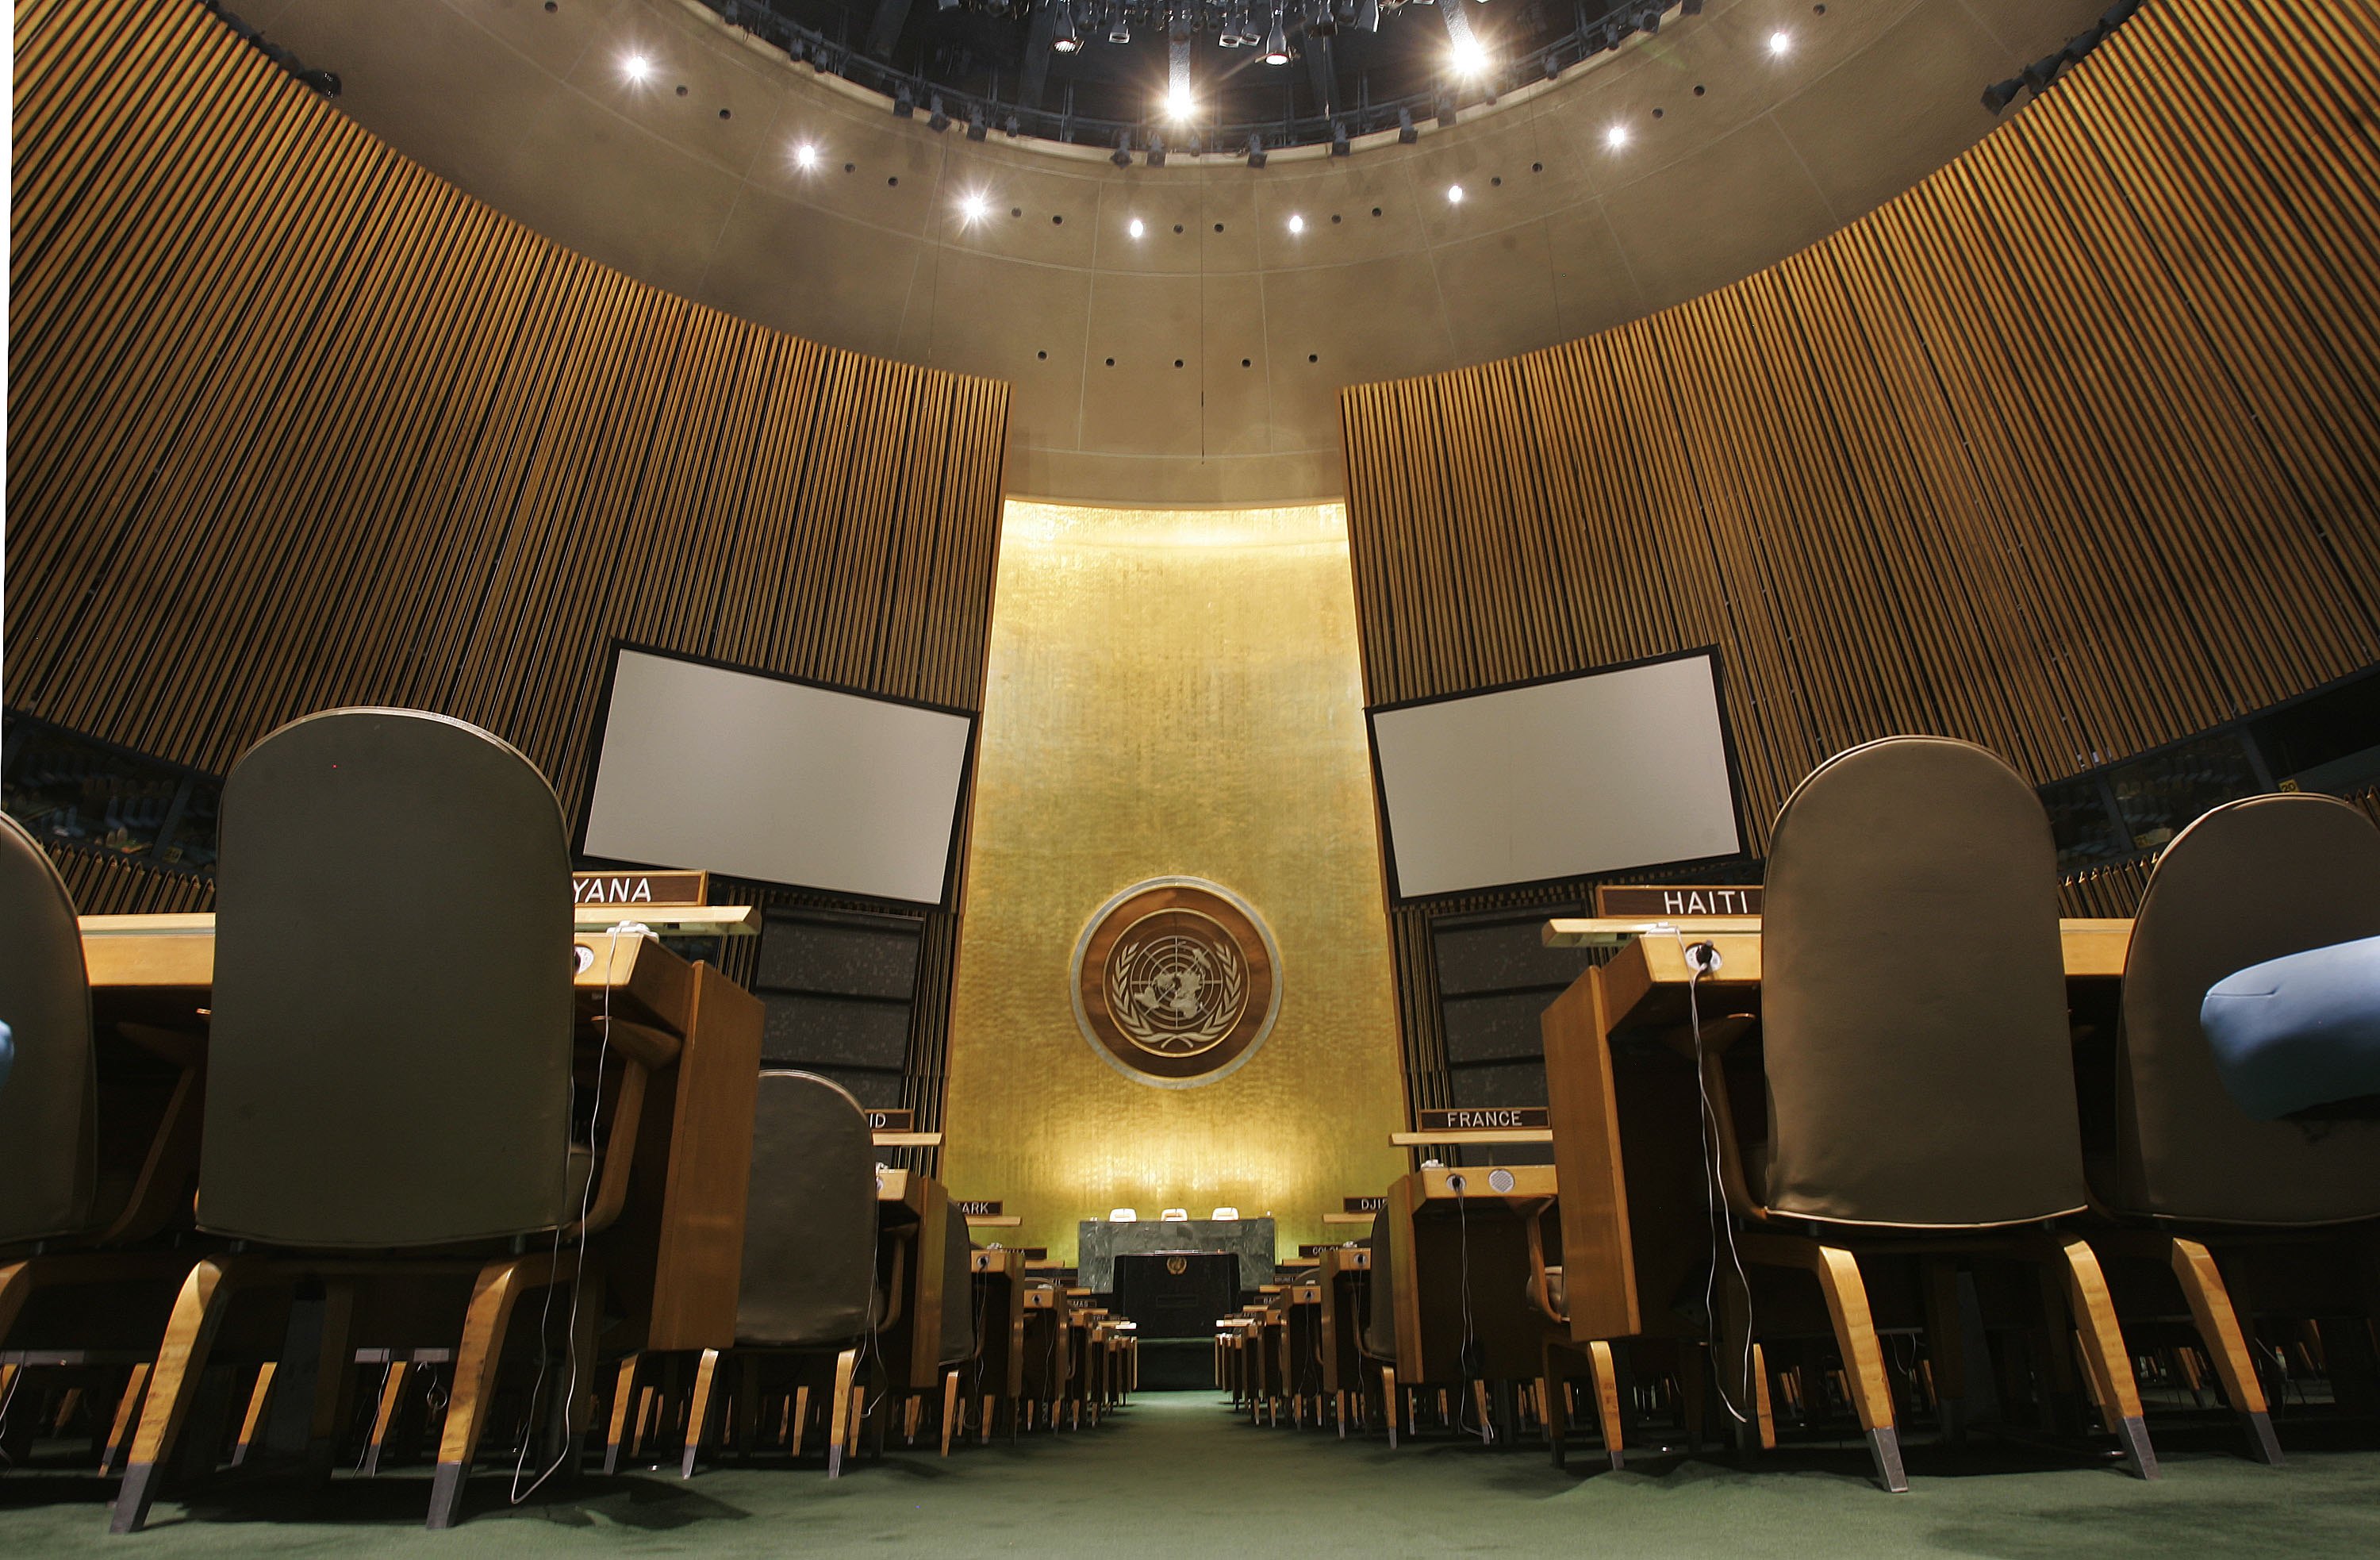 Behind The Scenes At The United Nations